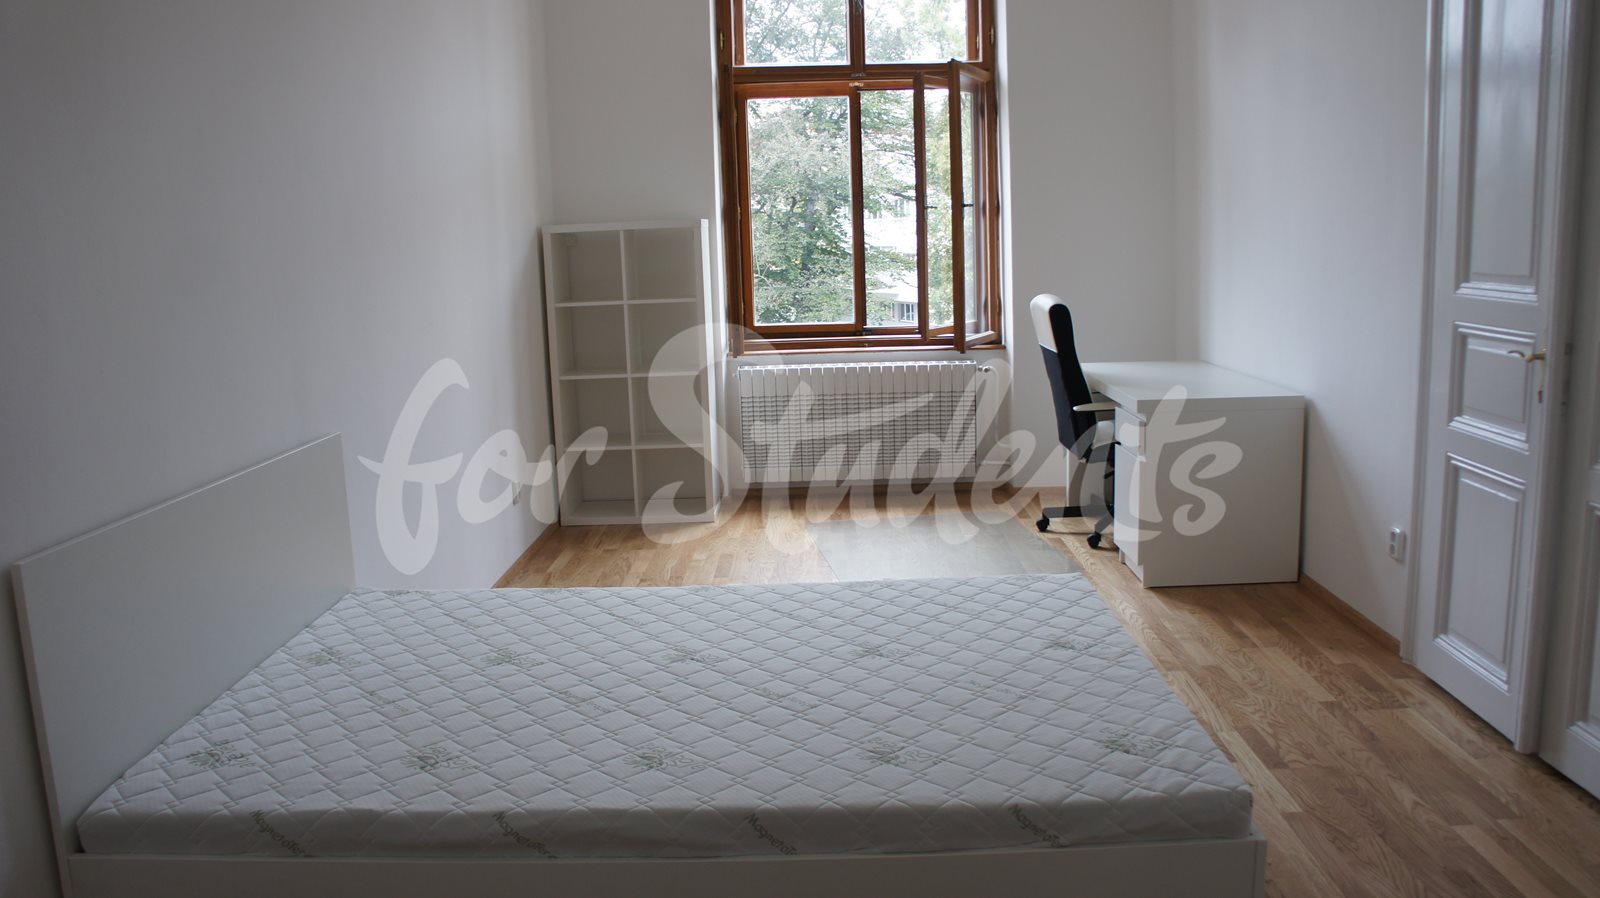  Three bedroom apartment in a student's house in the center of town, Hradec Králové